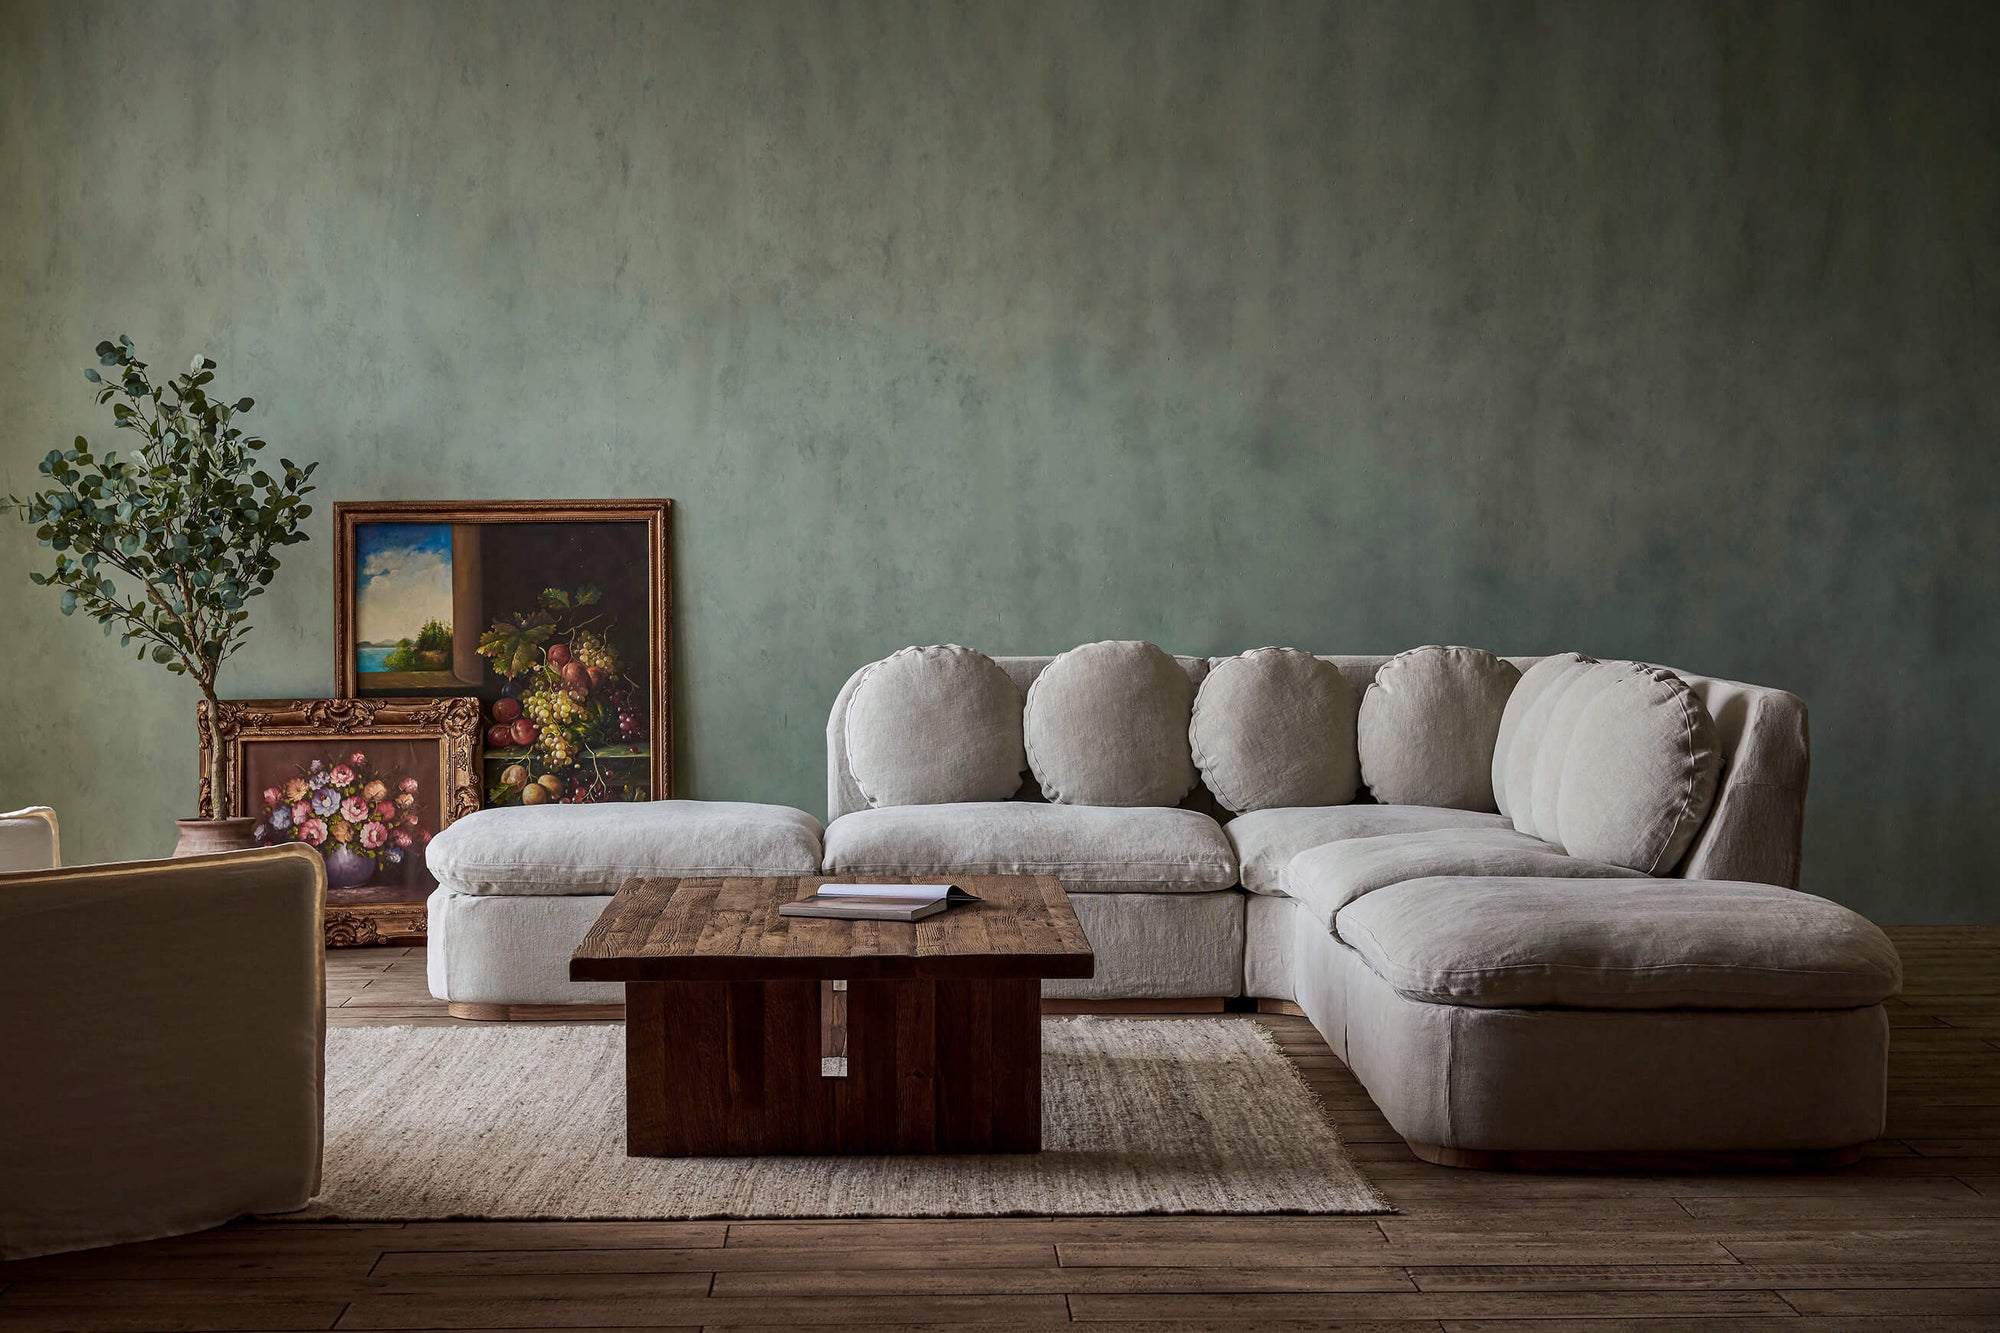 Olea Long Corner Sectional Sofa in Jasmine Rice, a light warm greige Medium Weight Linen, placed in a room facing a coffee table